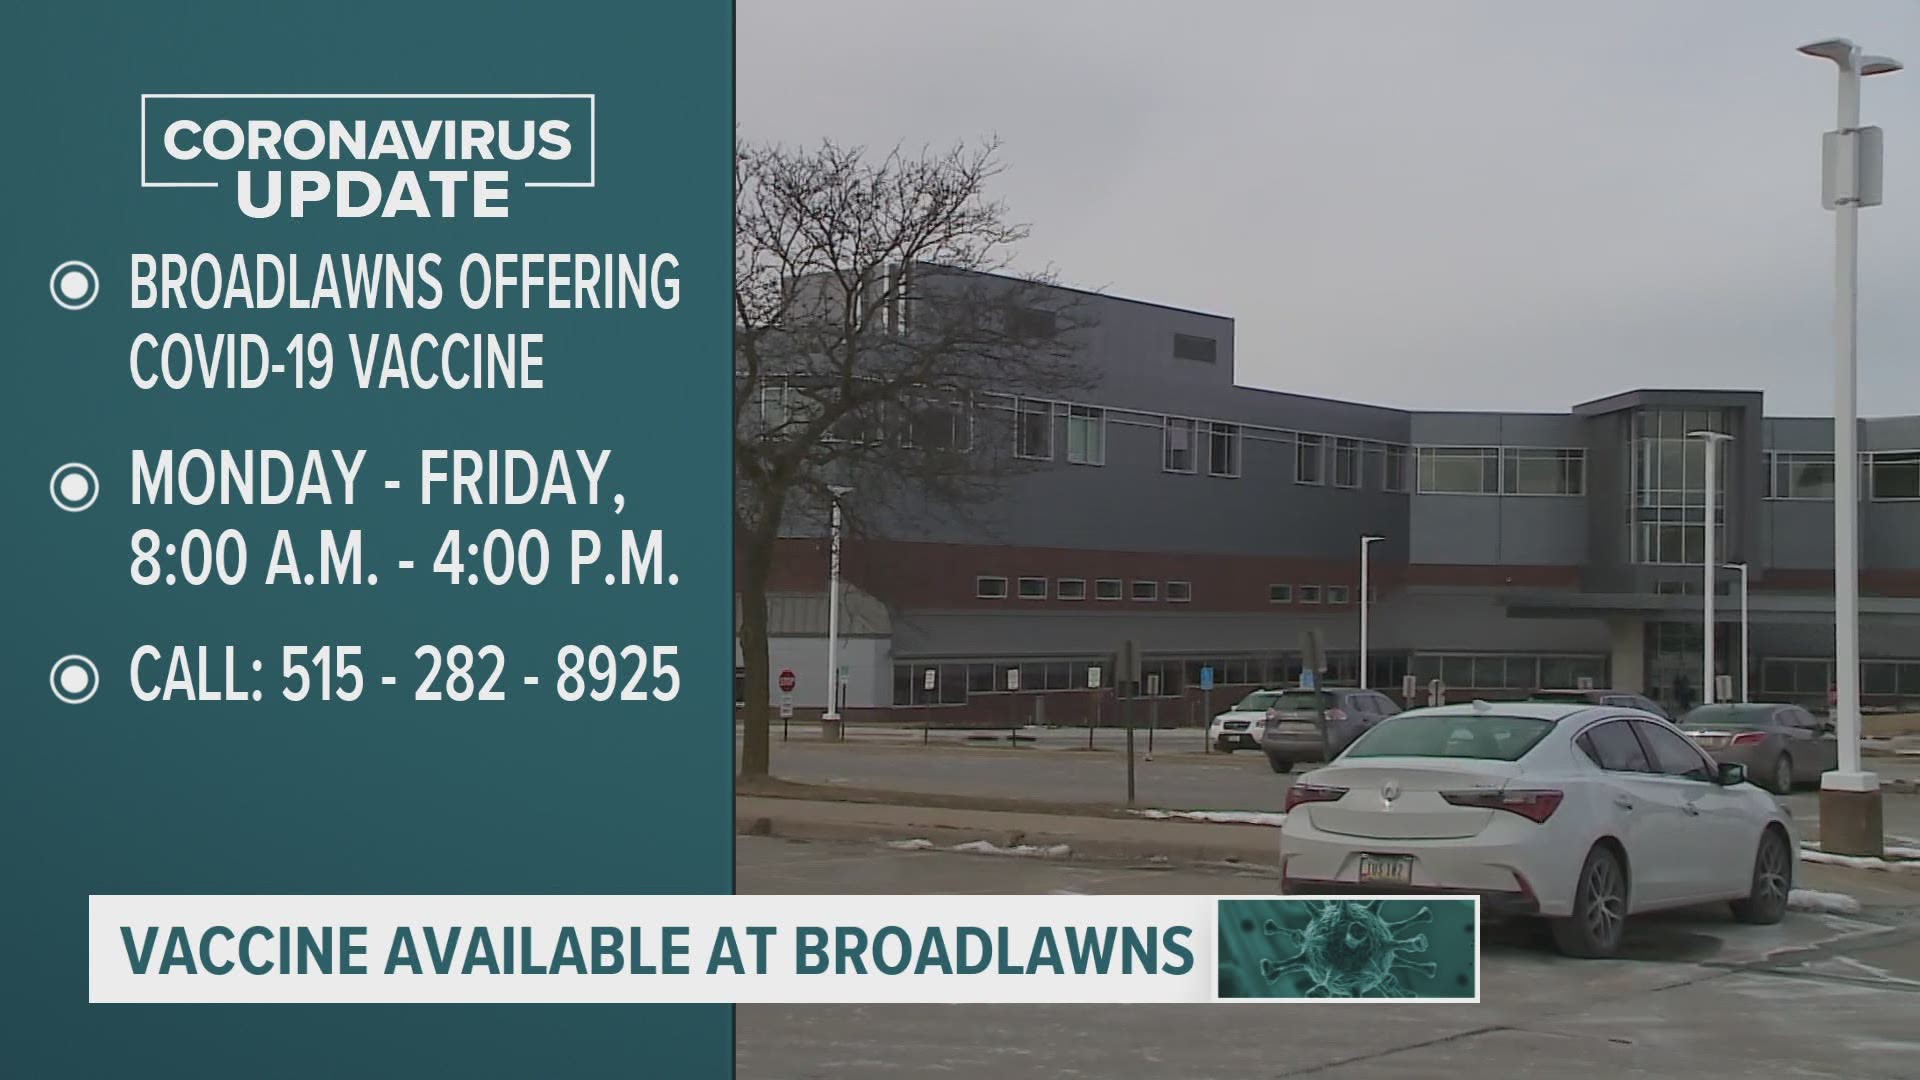 Vaccine appointments will be available starting the week of Jan. 25 for ages 65 and older